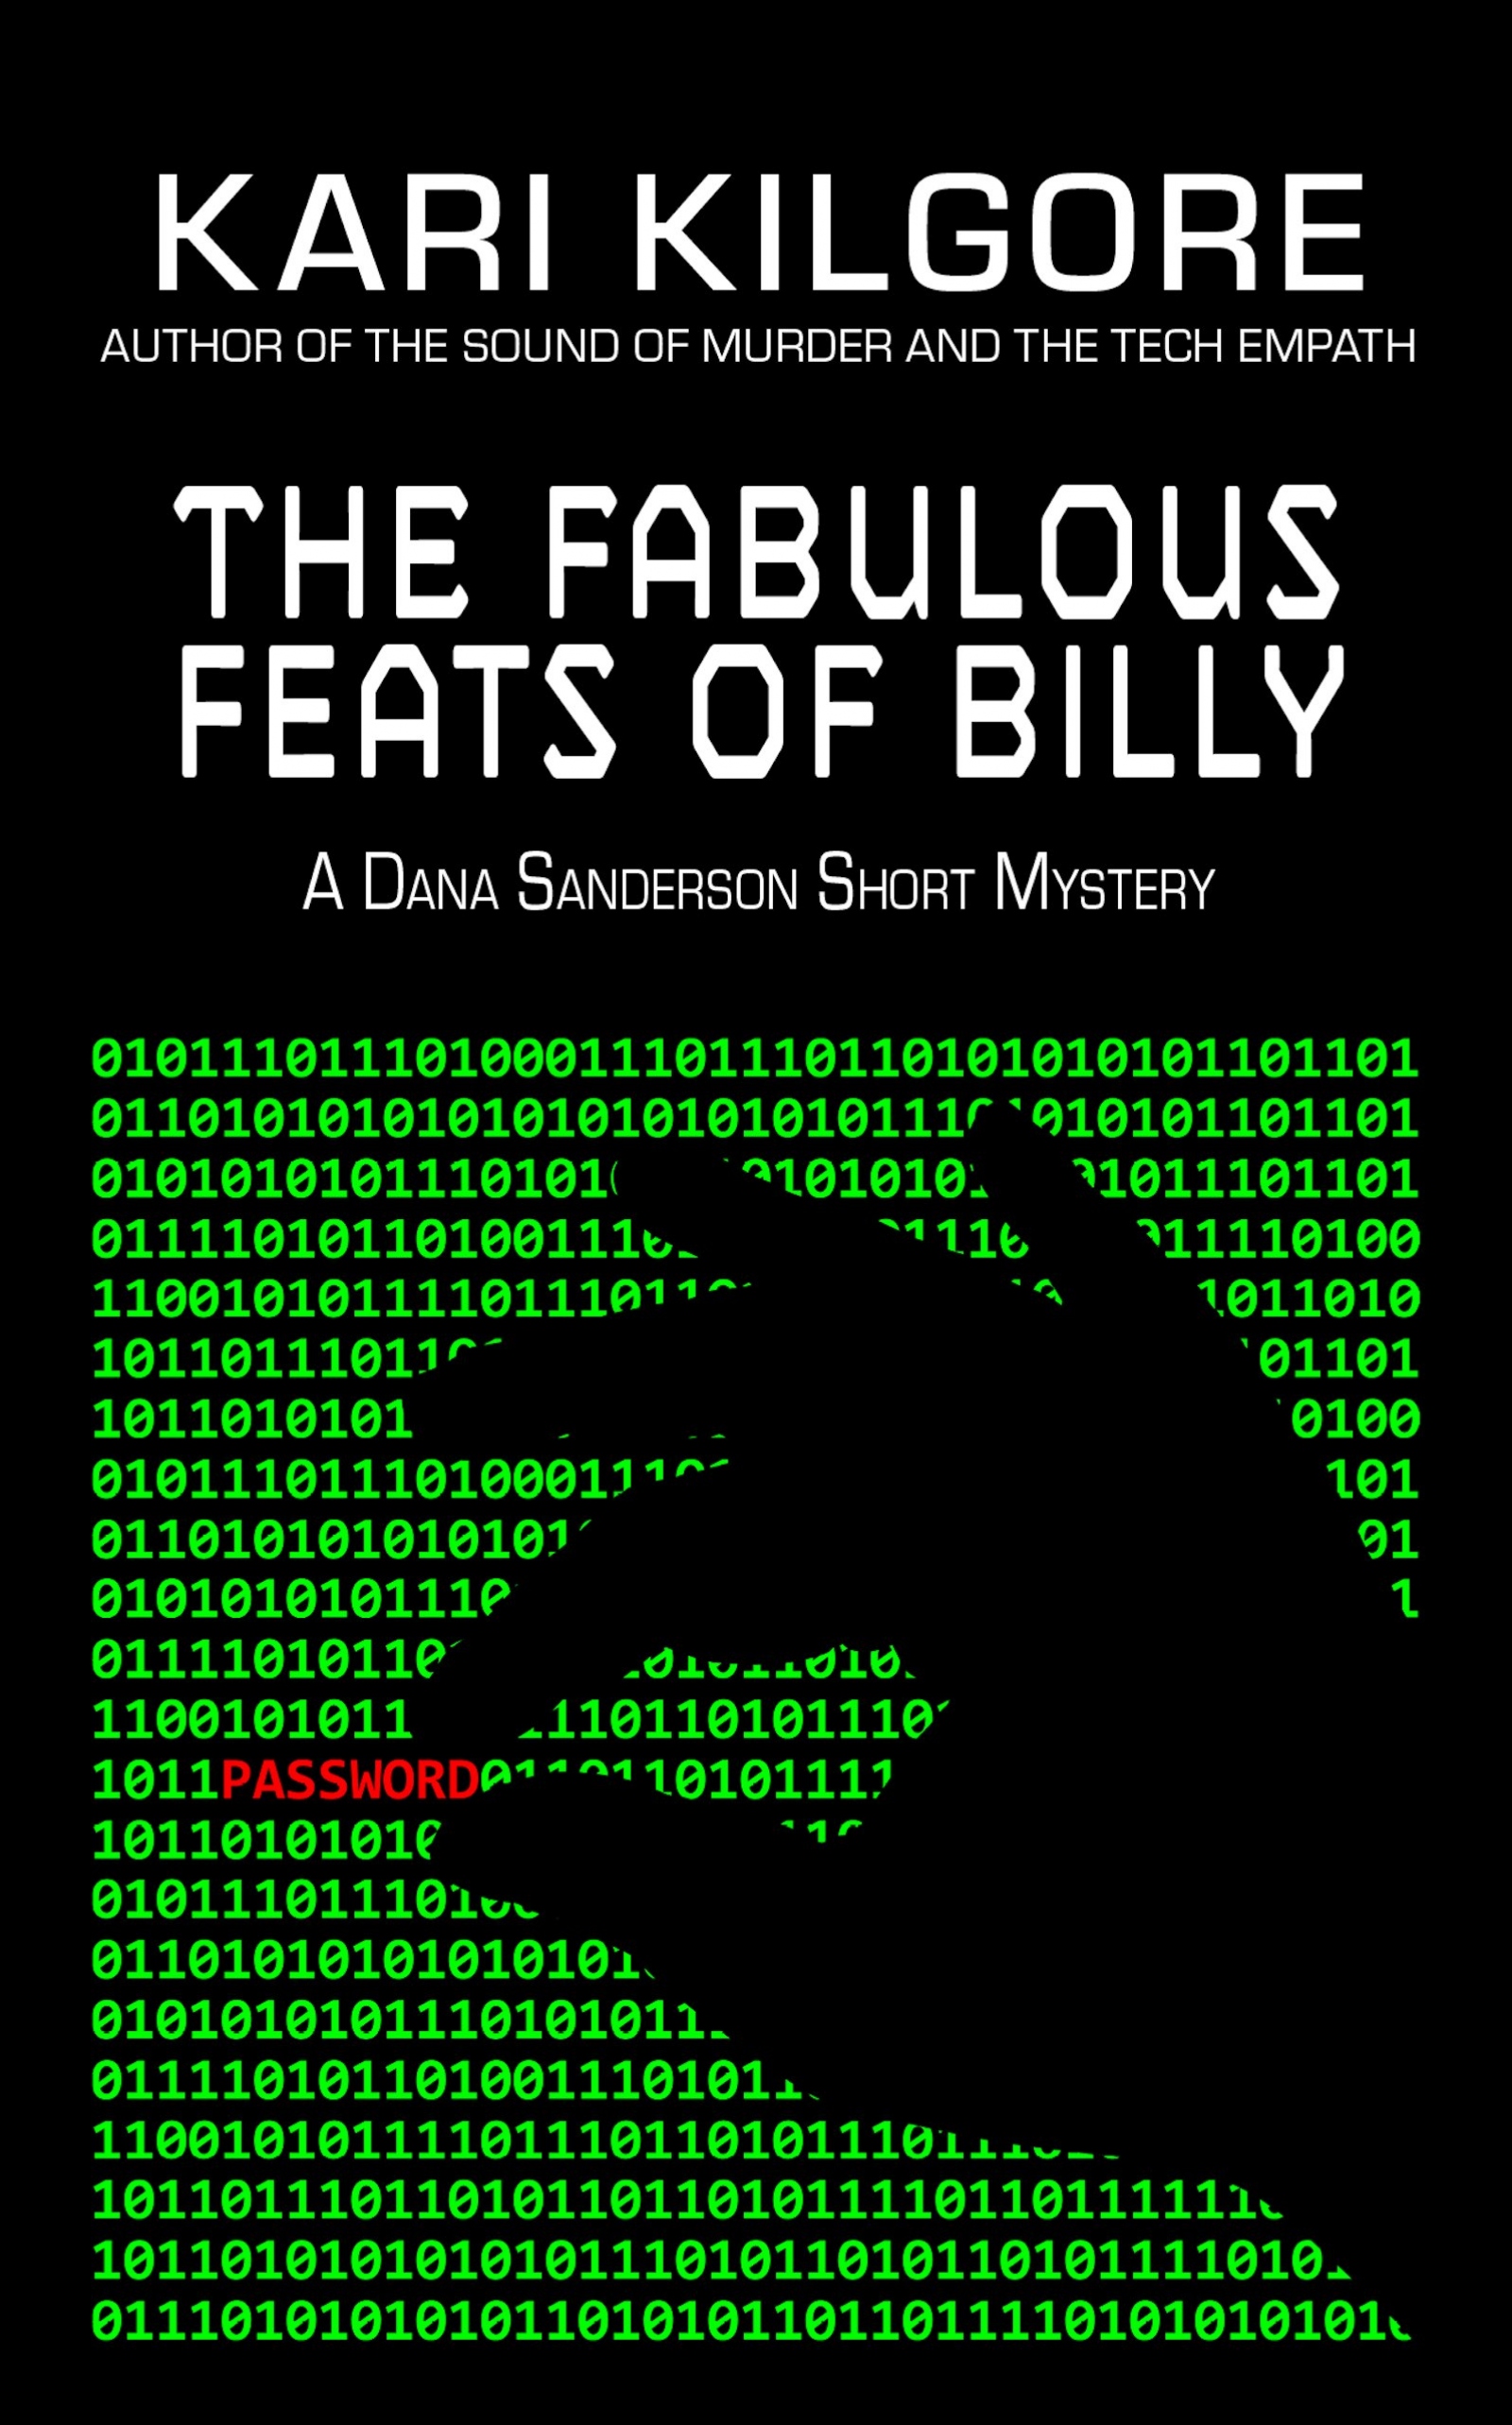 The Fabulous Feats of Billy